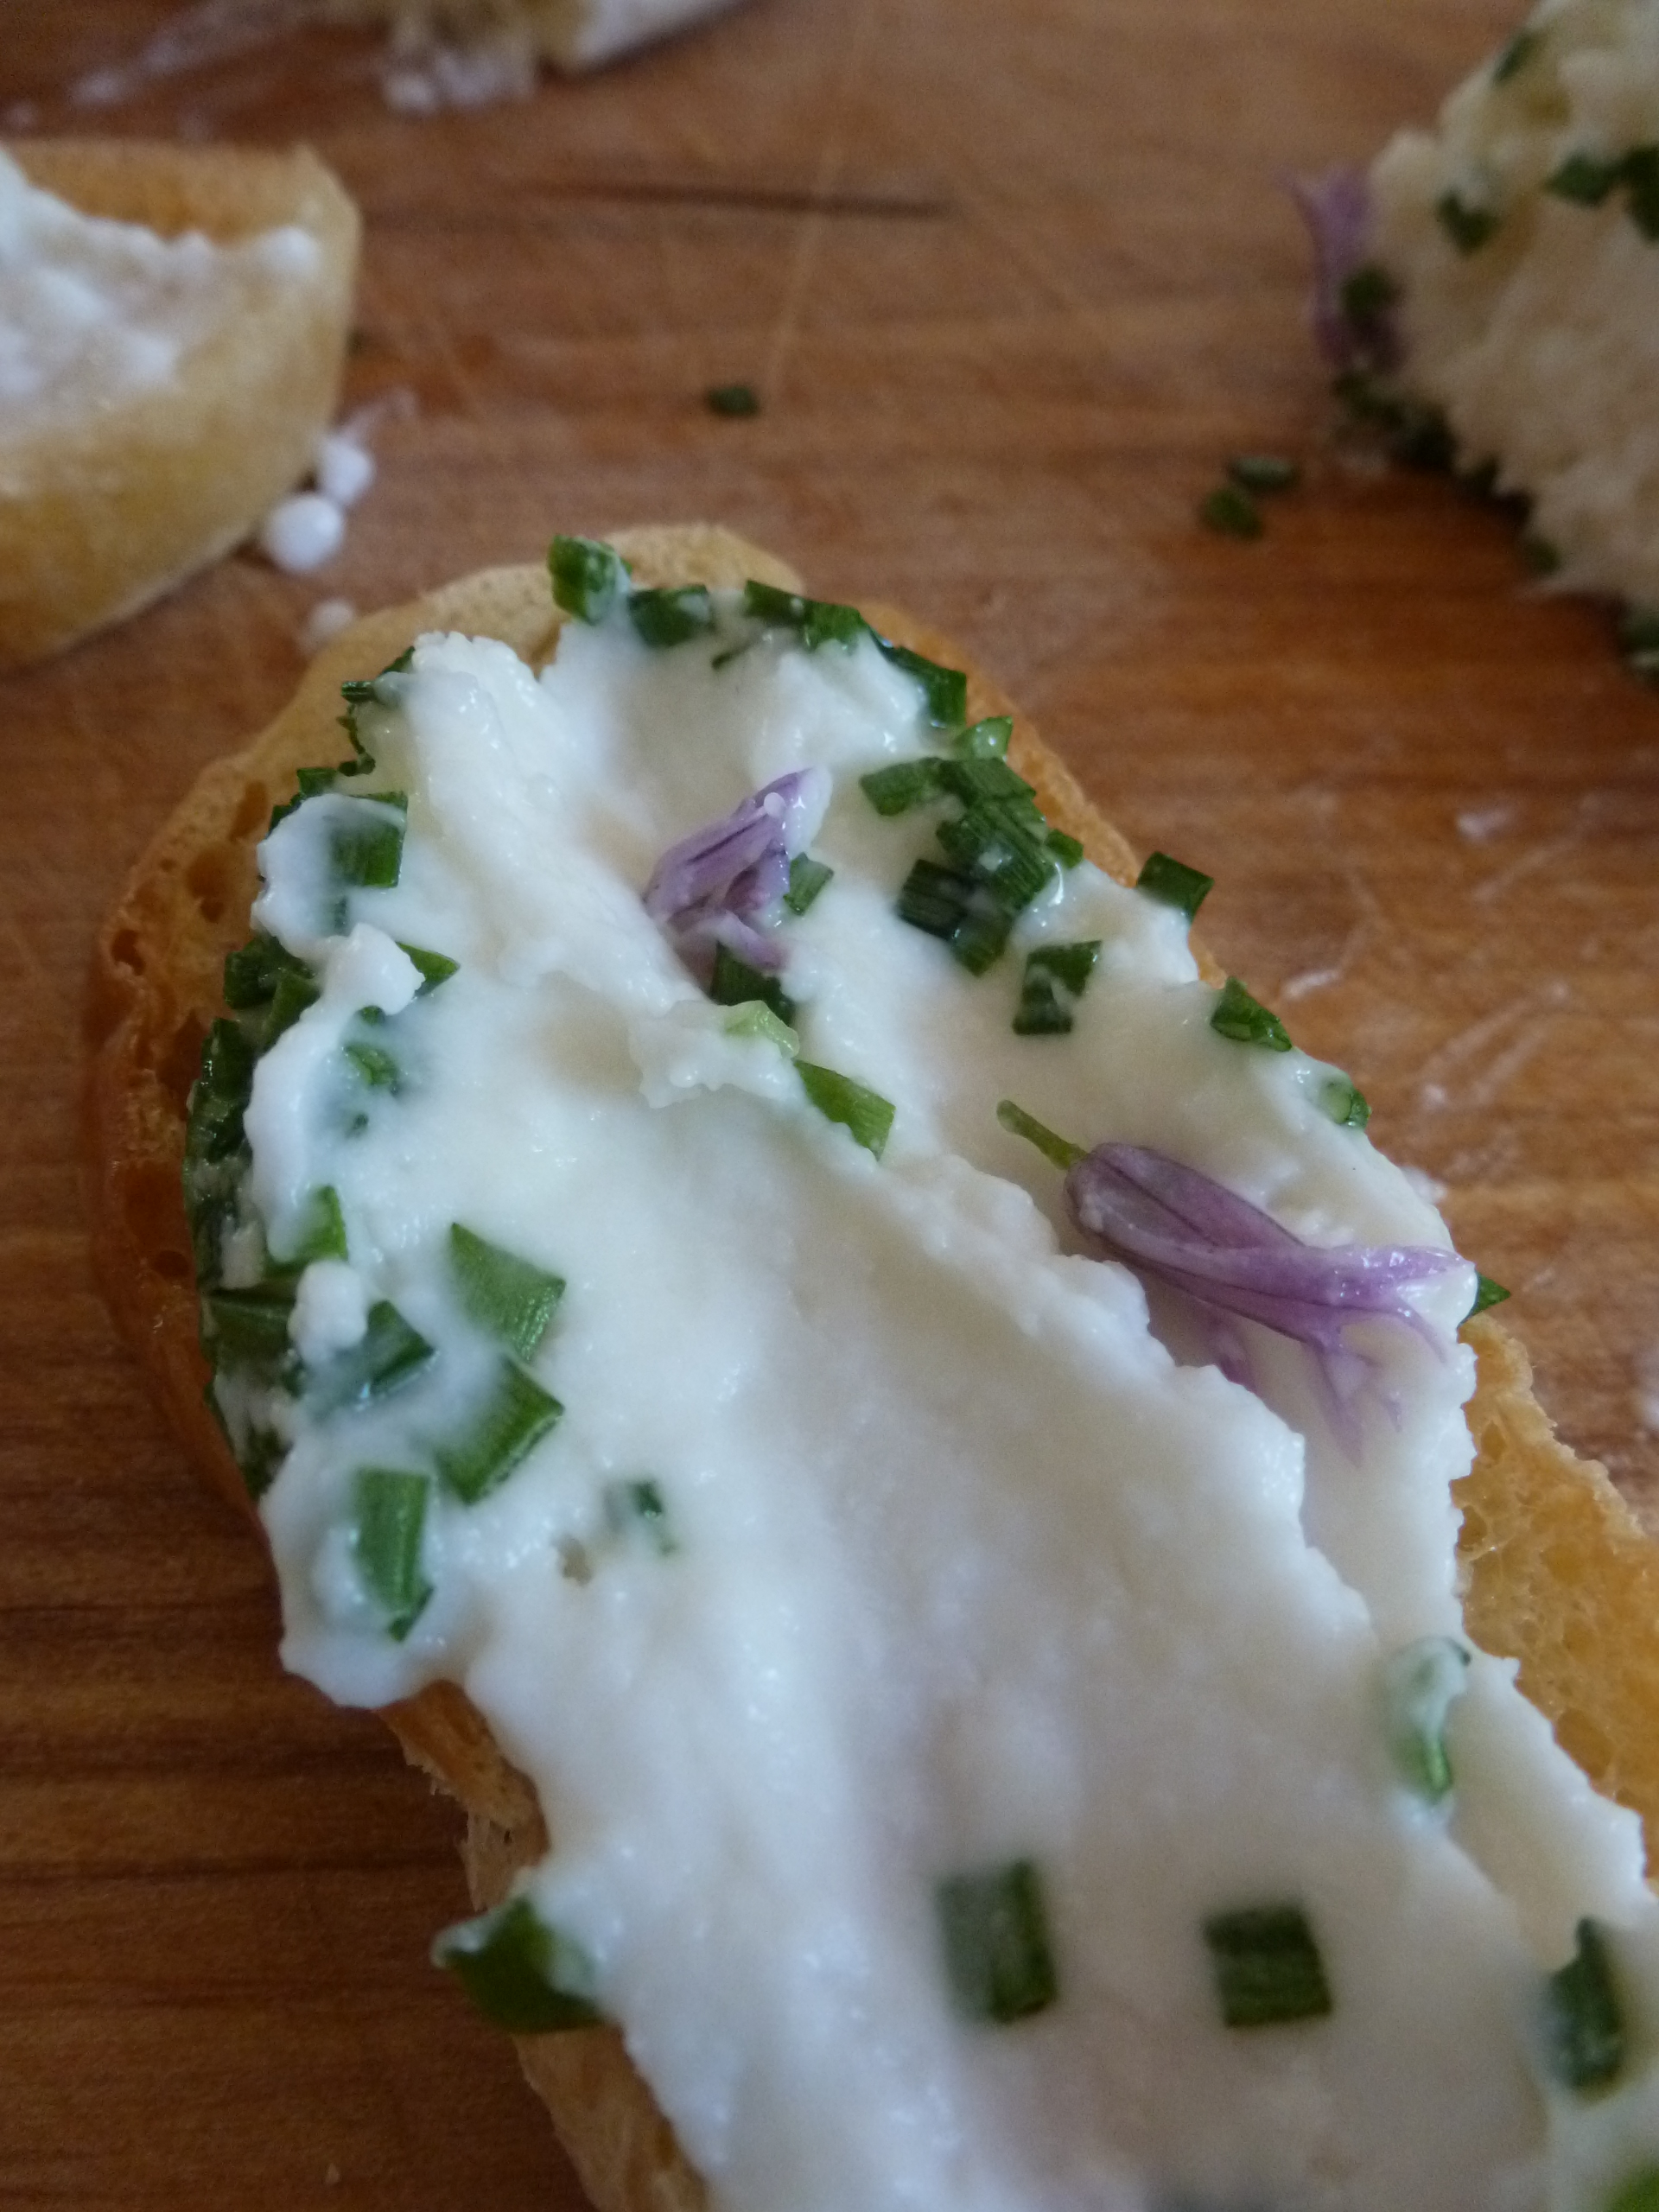 Goat cheese with chive stems and blossoms